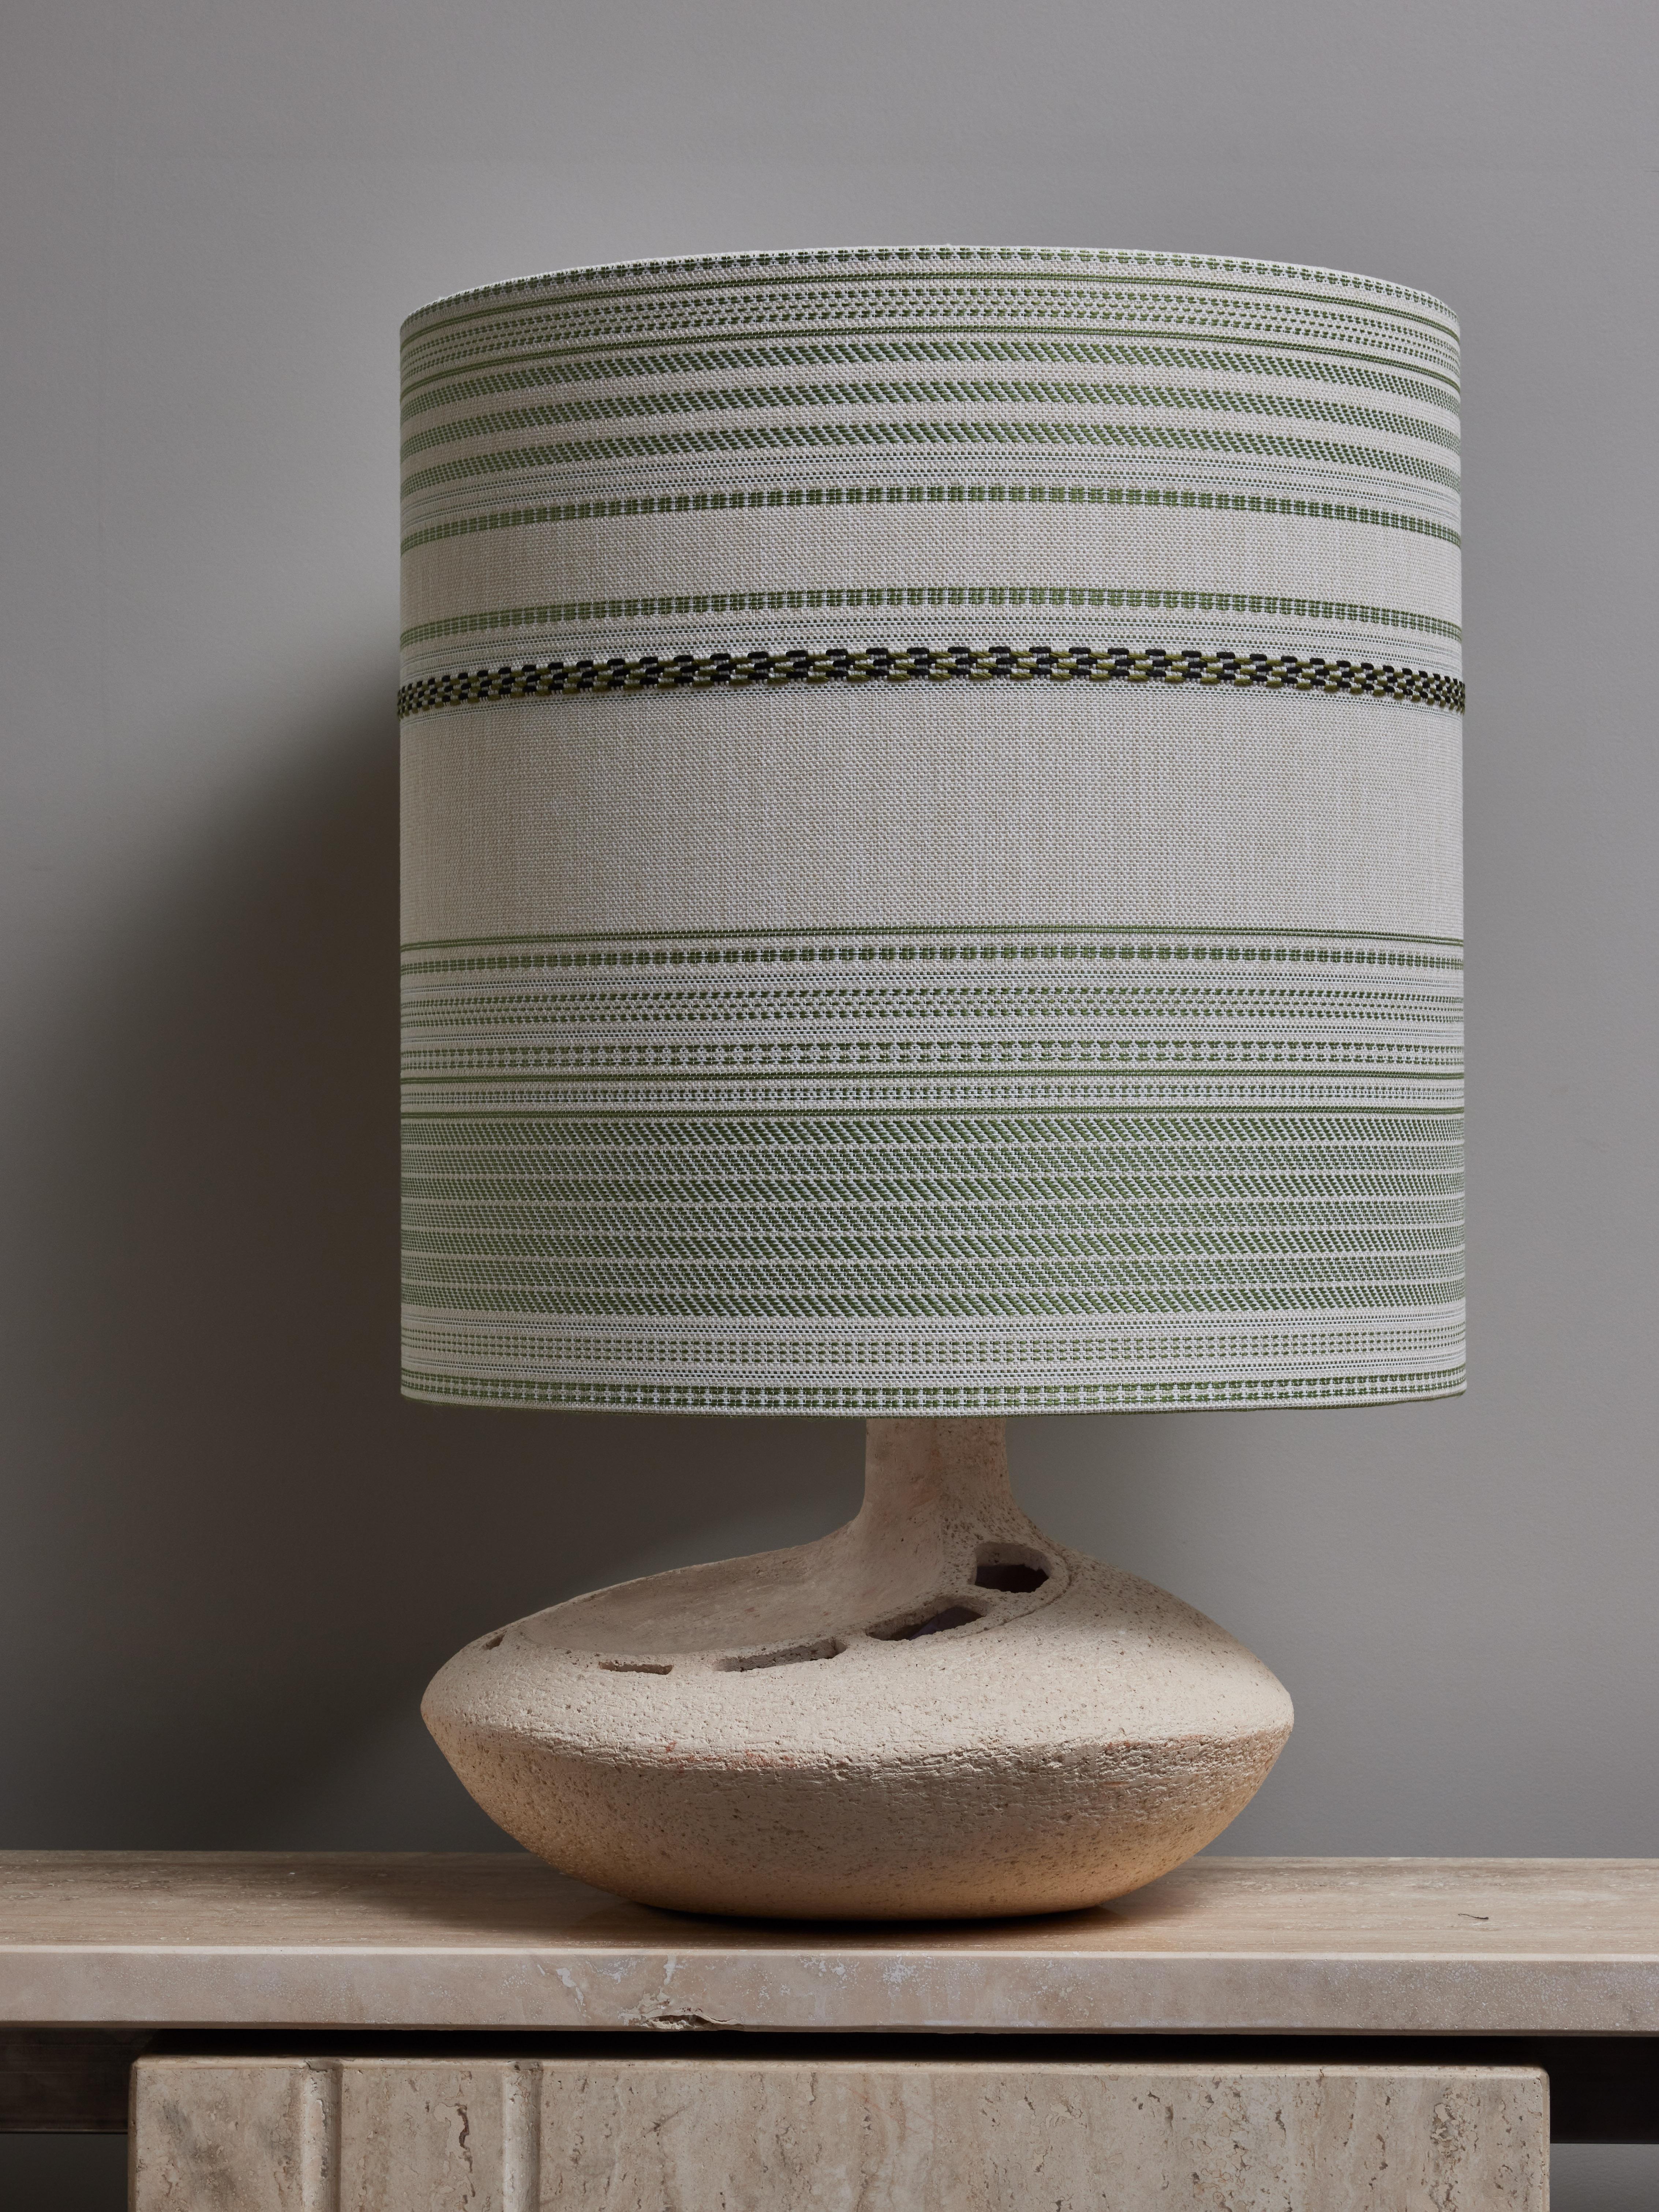 Ceramic table lamp by Christian Pradier with inner lighting, topped with a modern shade with Casamance fabric